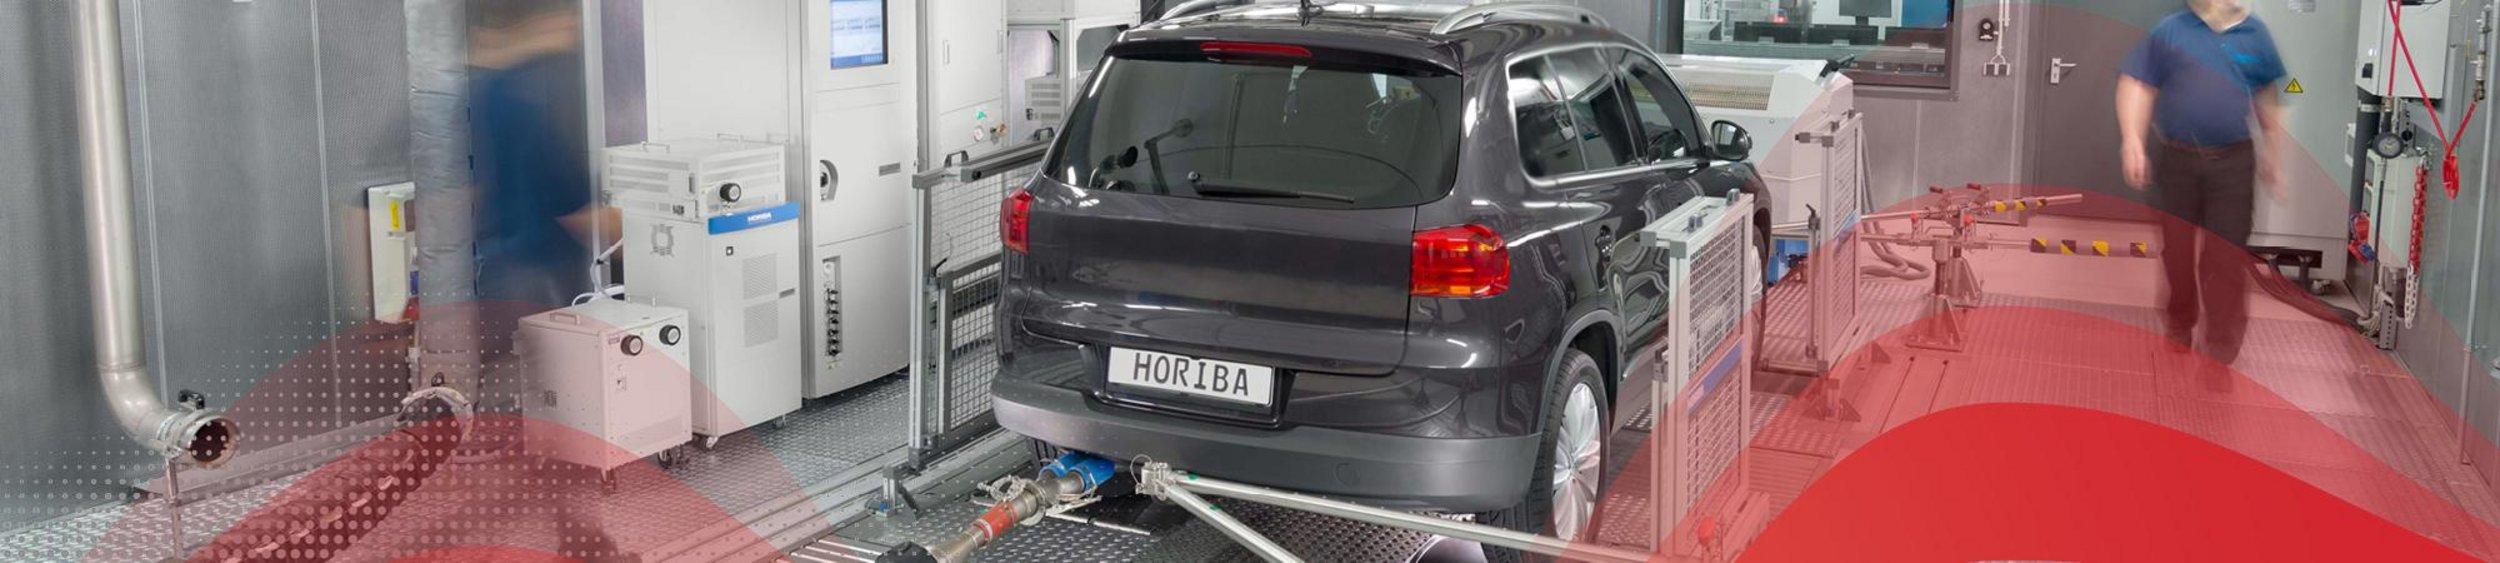 HORIBA Automotive Exhaust Emission Test Cell for Euro 7 regulations